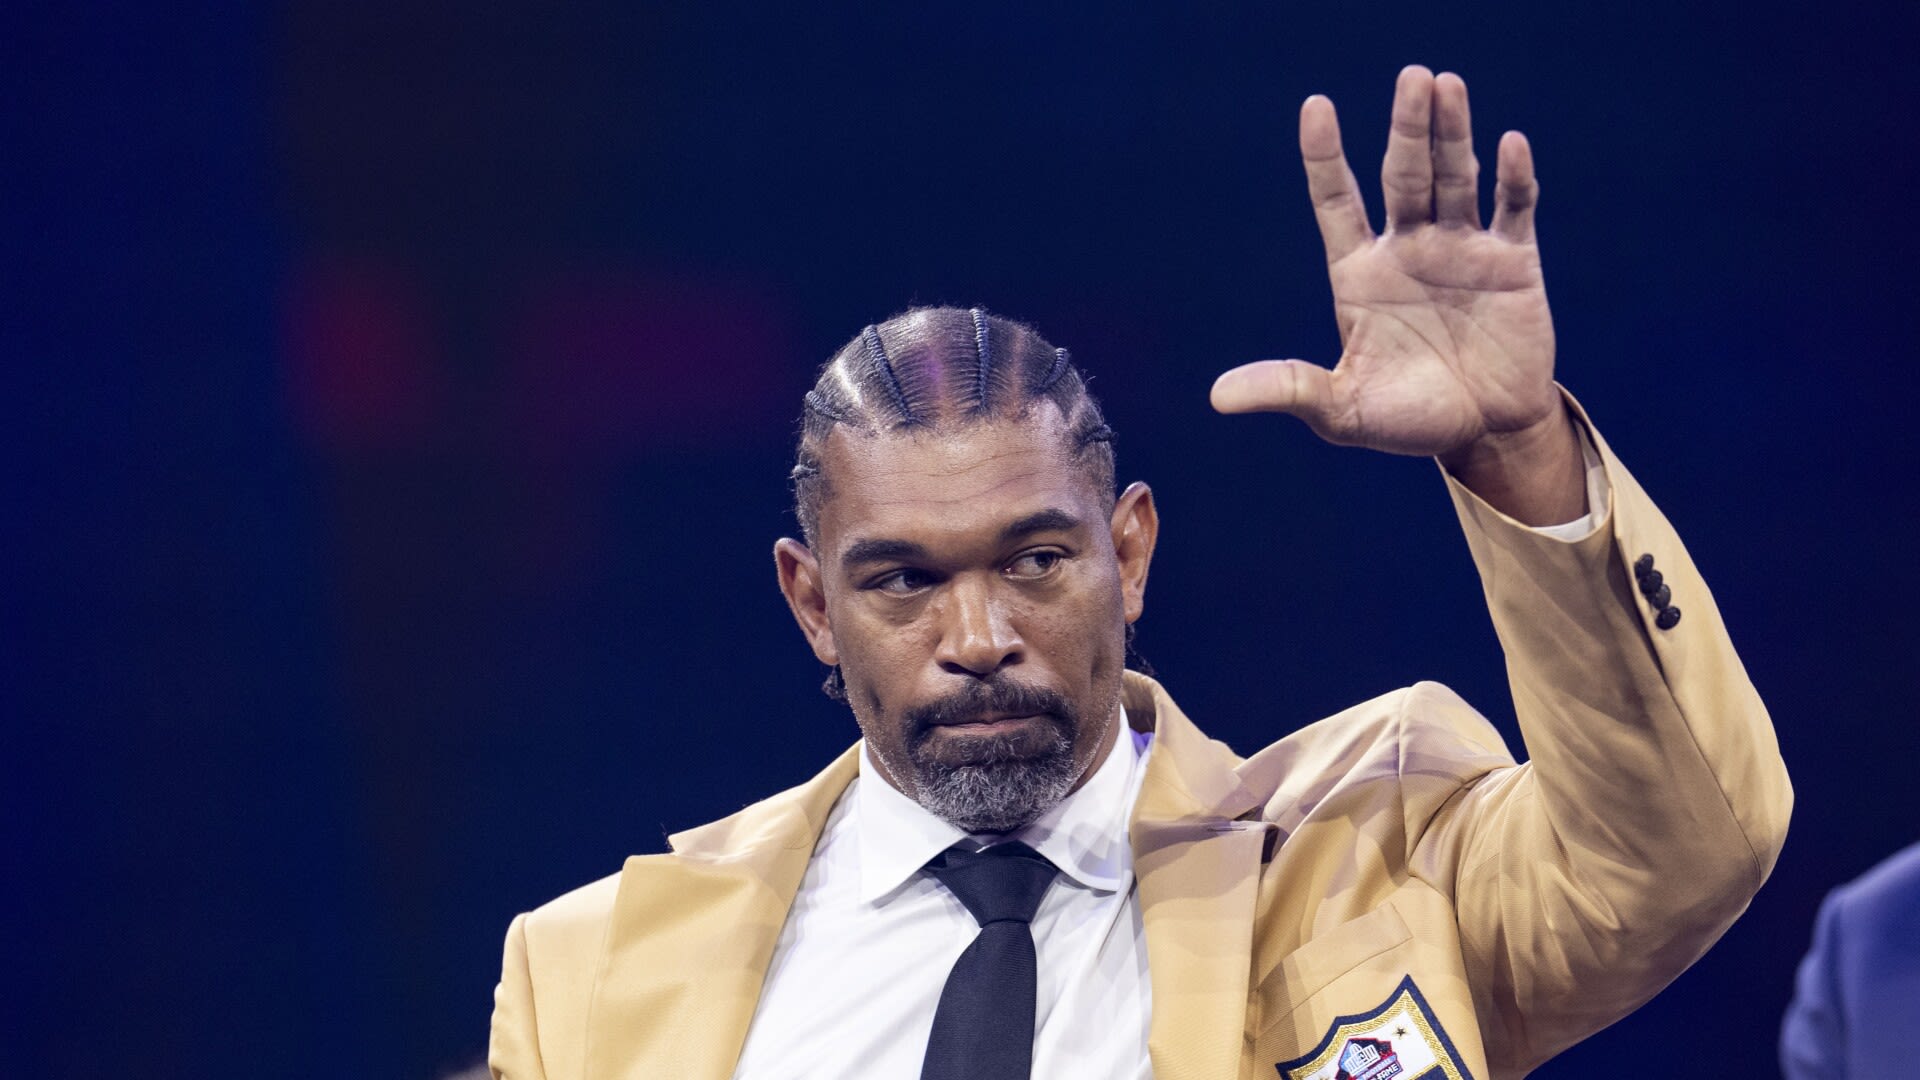 Julius Peppers thanks all his "root people" for helping him reach the Hall of Fame